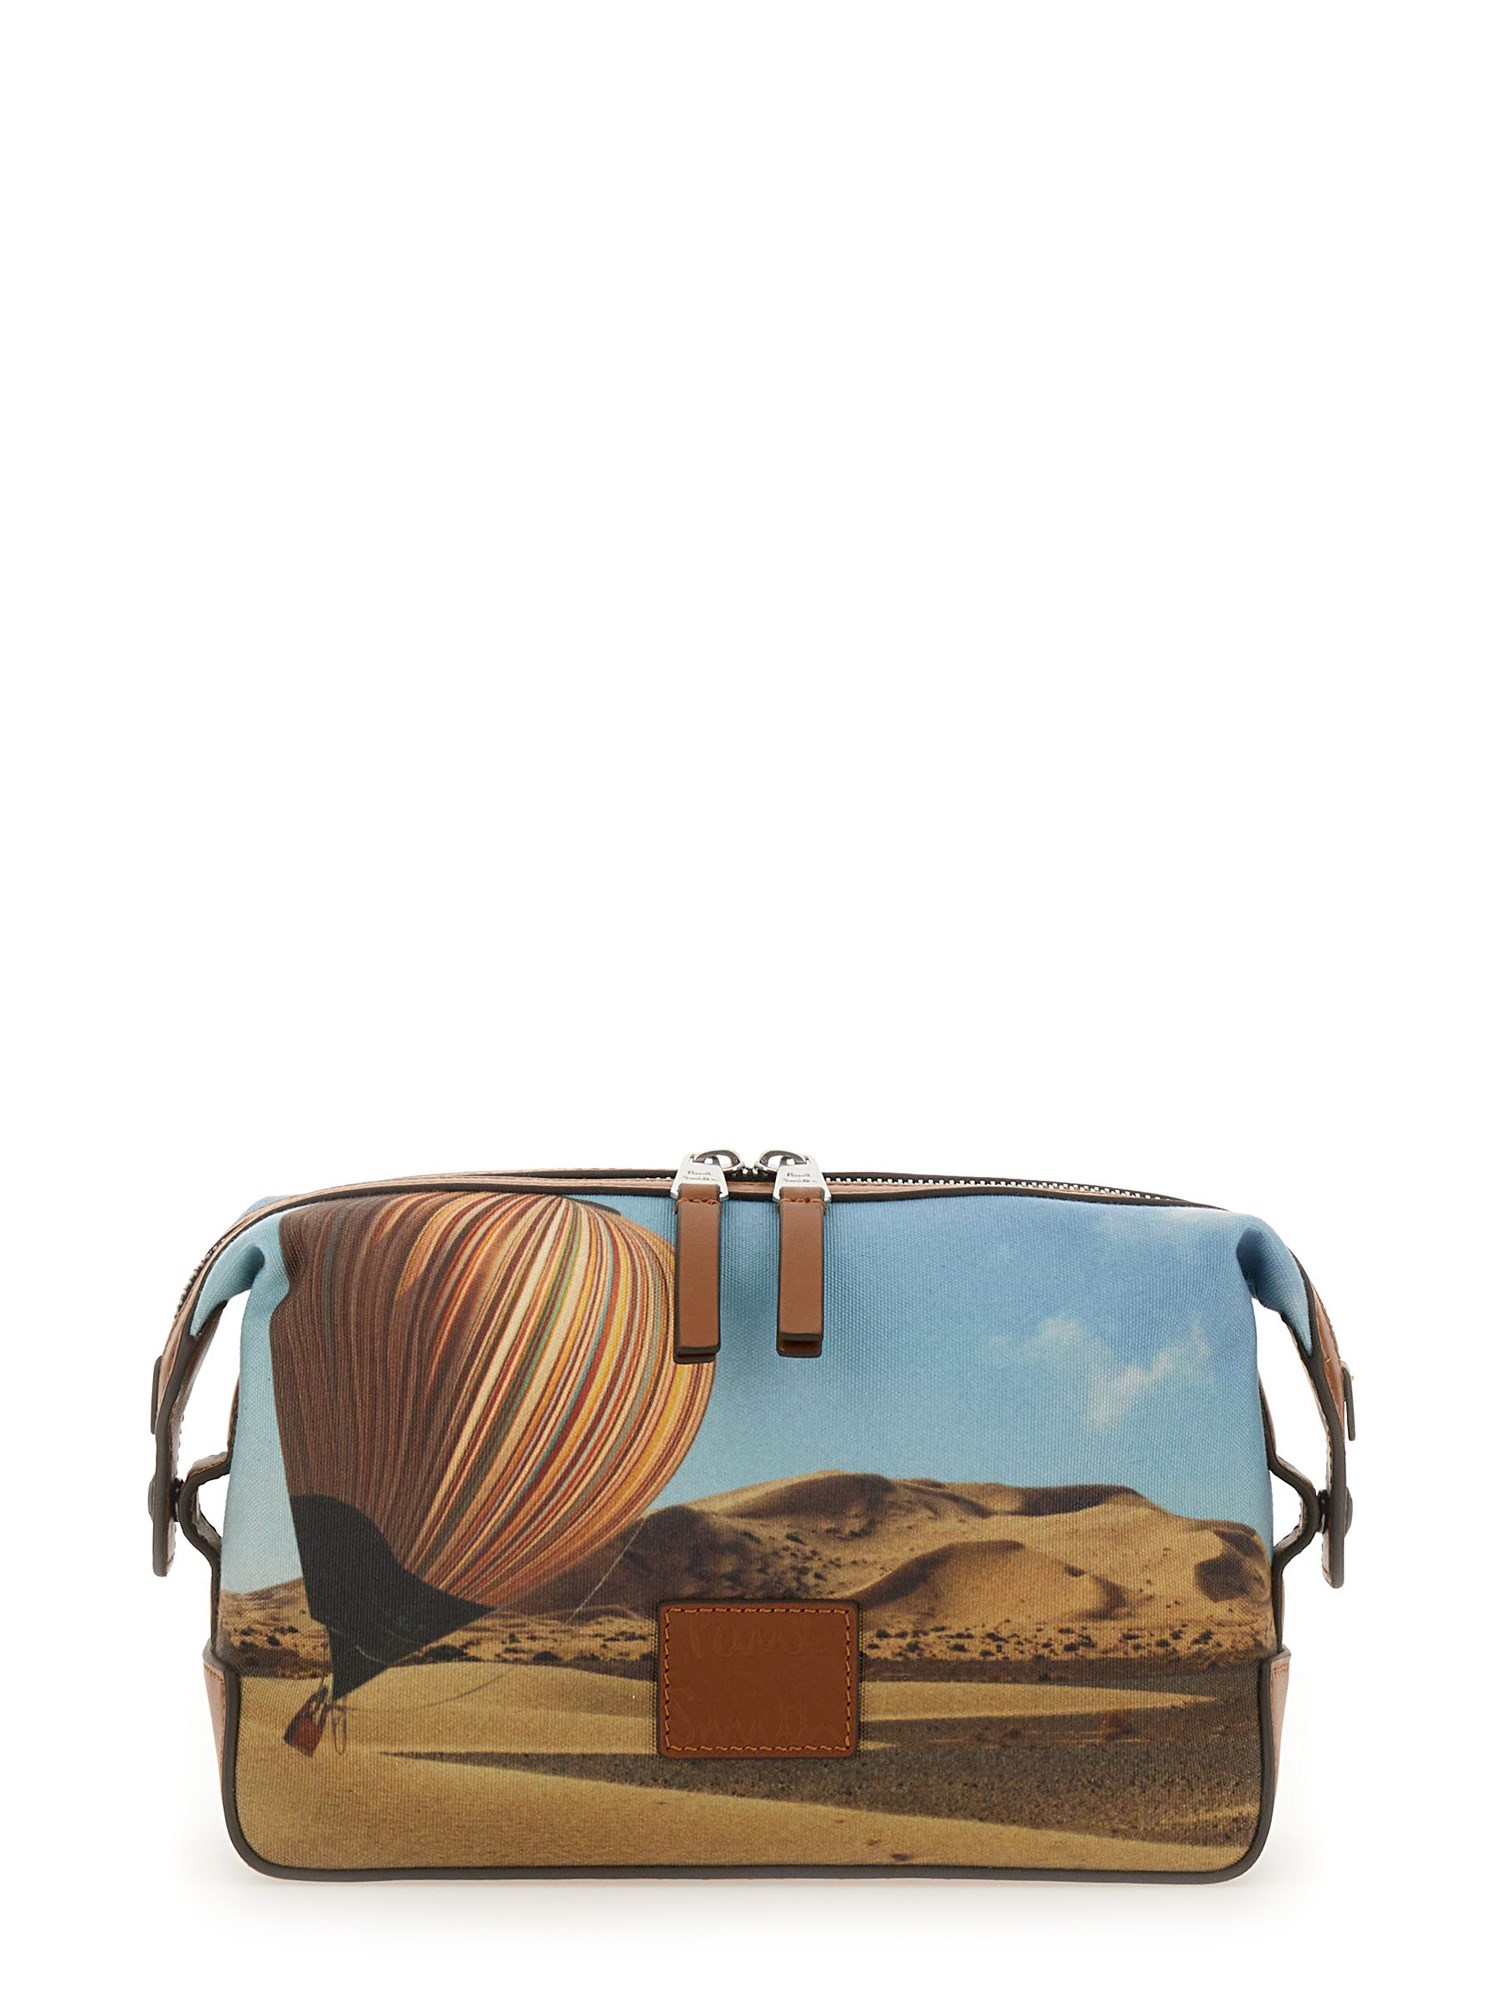 paul smith beauty case with 